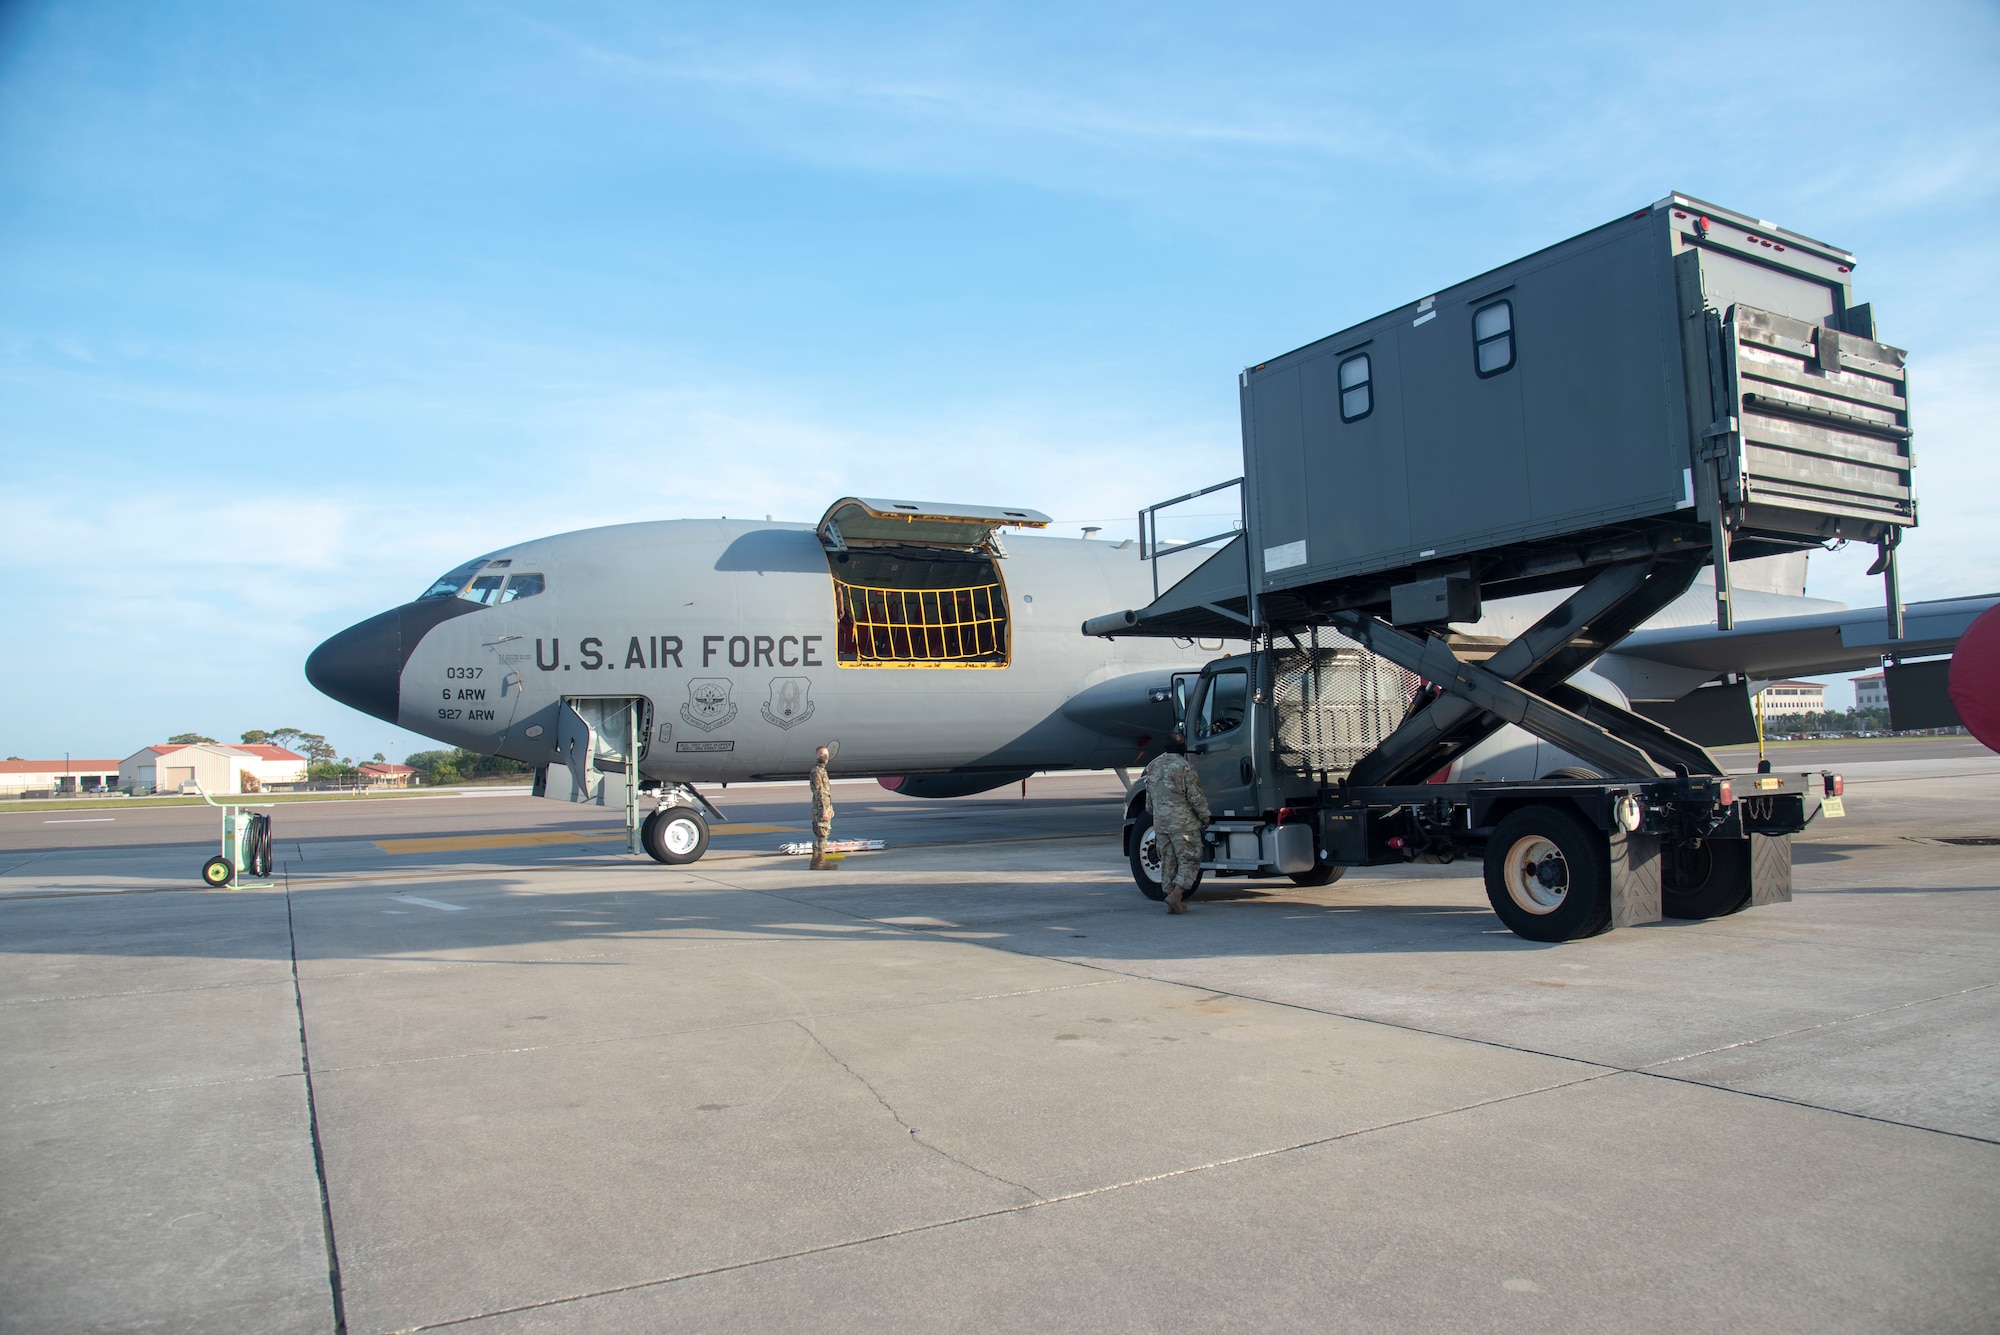 A 6th Operations Support Squadron (OSS) Aircrew Flight Equipment (AFE) truck pulls up to a KC-135 Stratotanker on the flightline at MacDill Air Force Base, Florida, April 14, 2021. AFE keeps all the lifesaving equipment and survival components on aircraft up to date by performing regular inspections, maintenance and replacing outdated equipment.